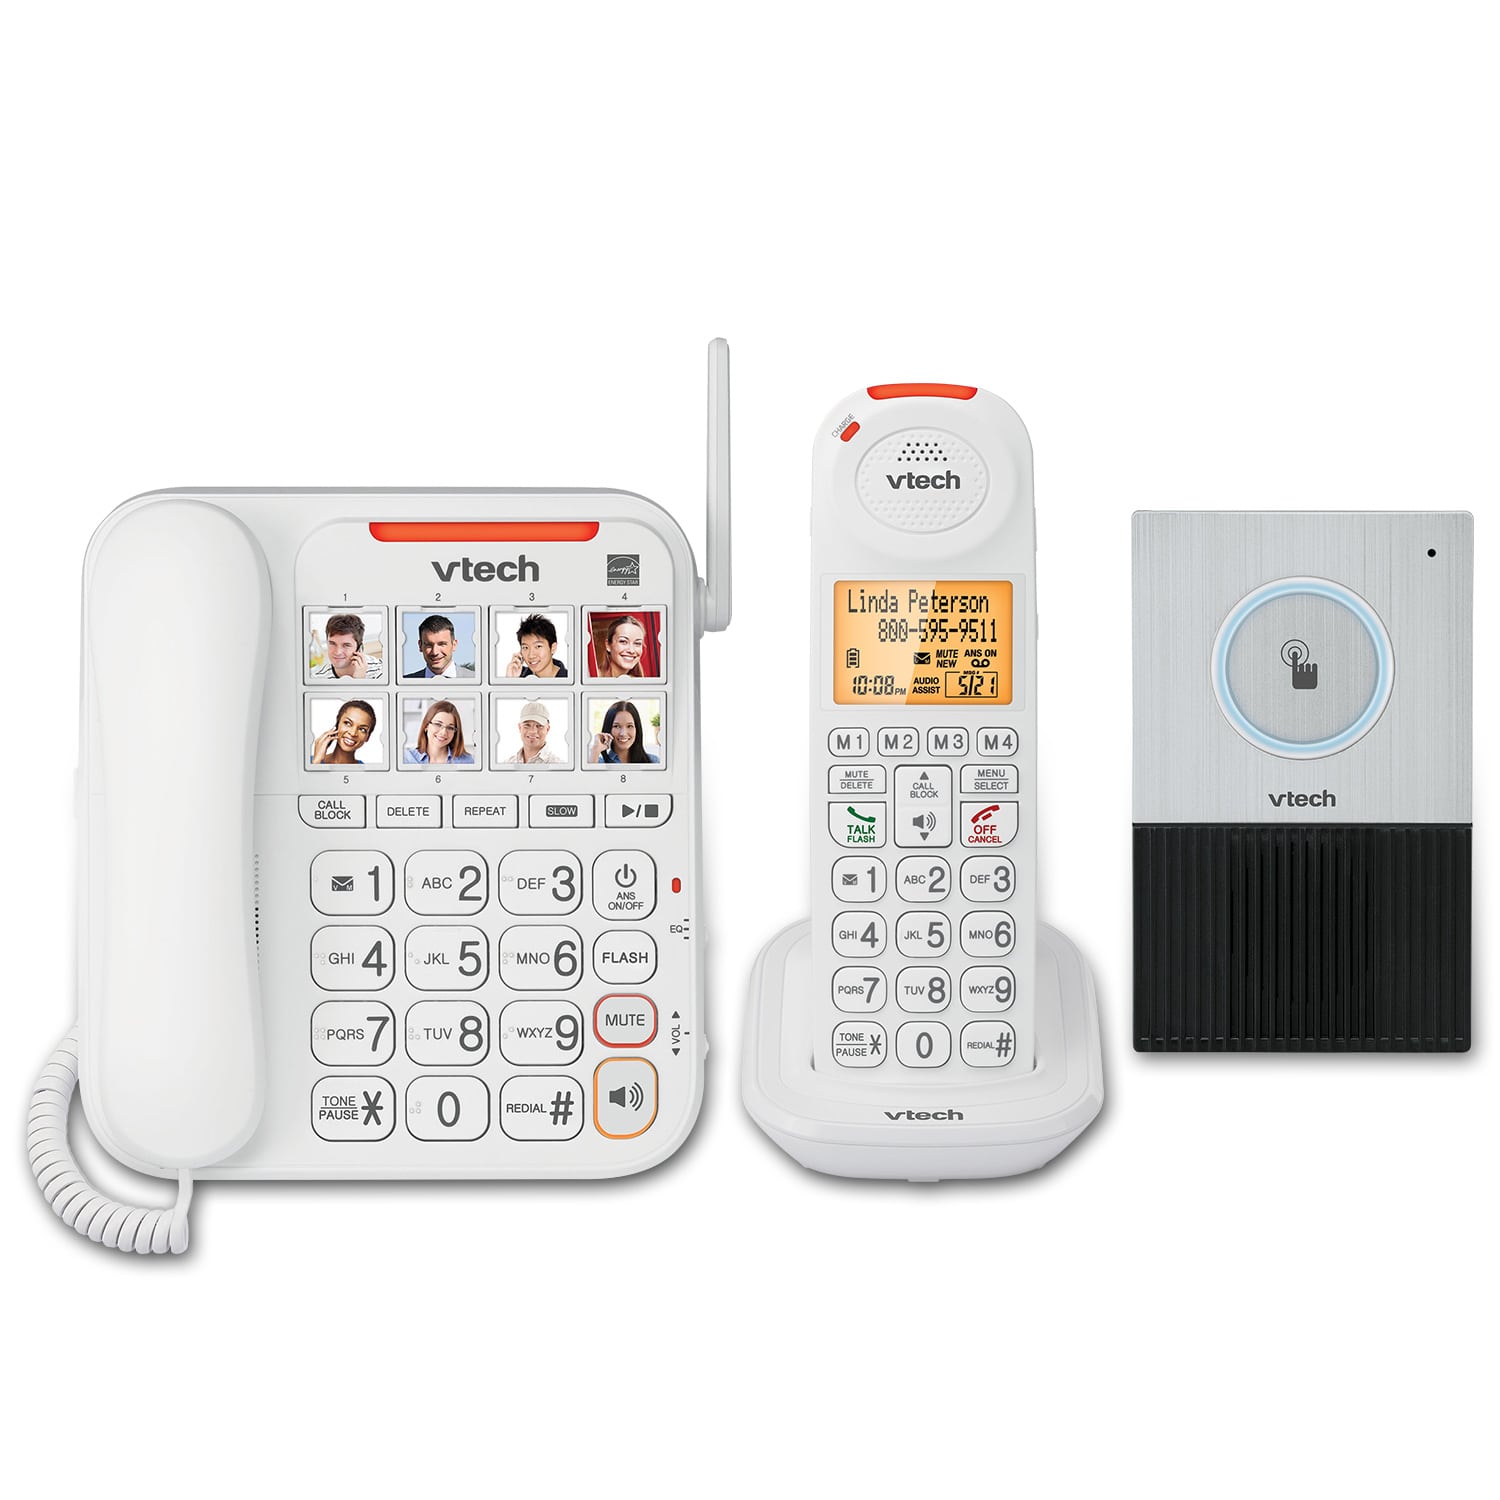 Amplified Corded/Cordless Answering system with Cordless Audio Doorbell and Smart Call Blocker